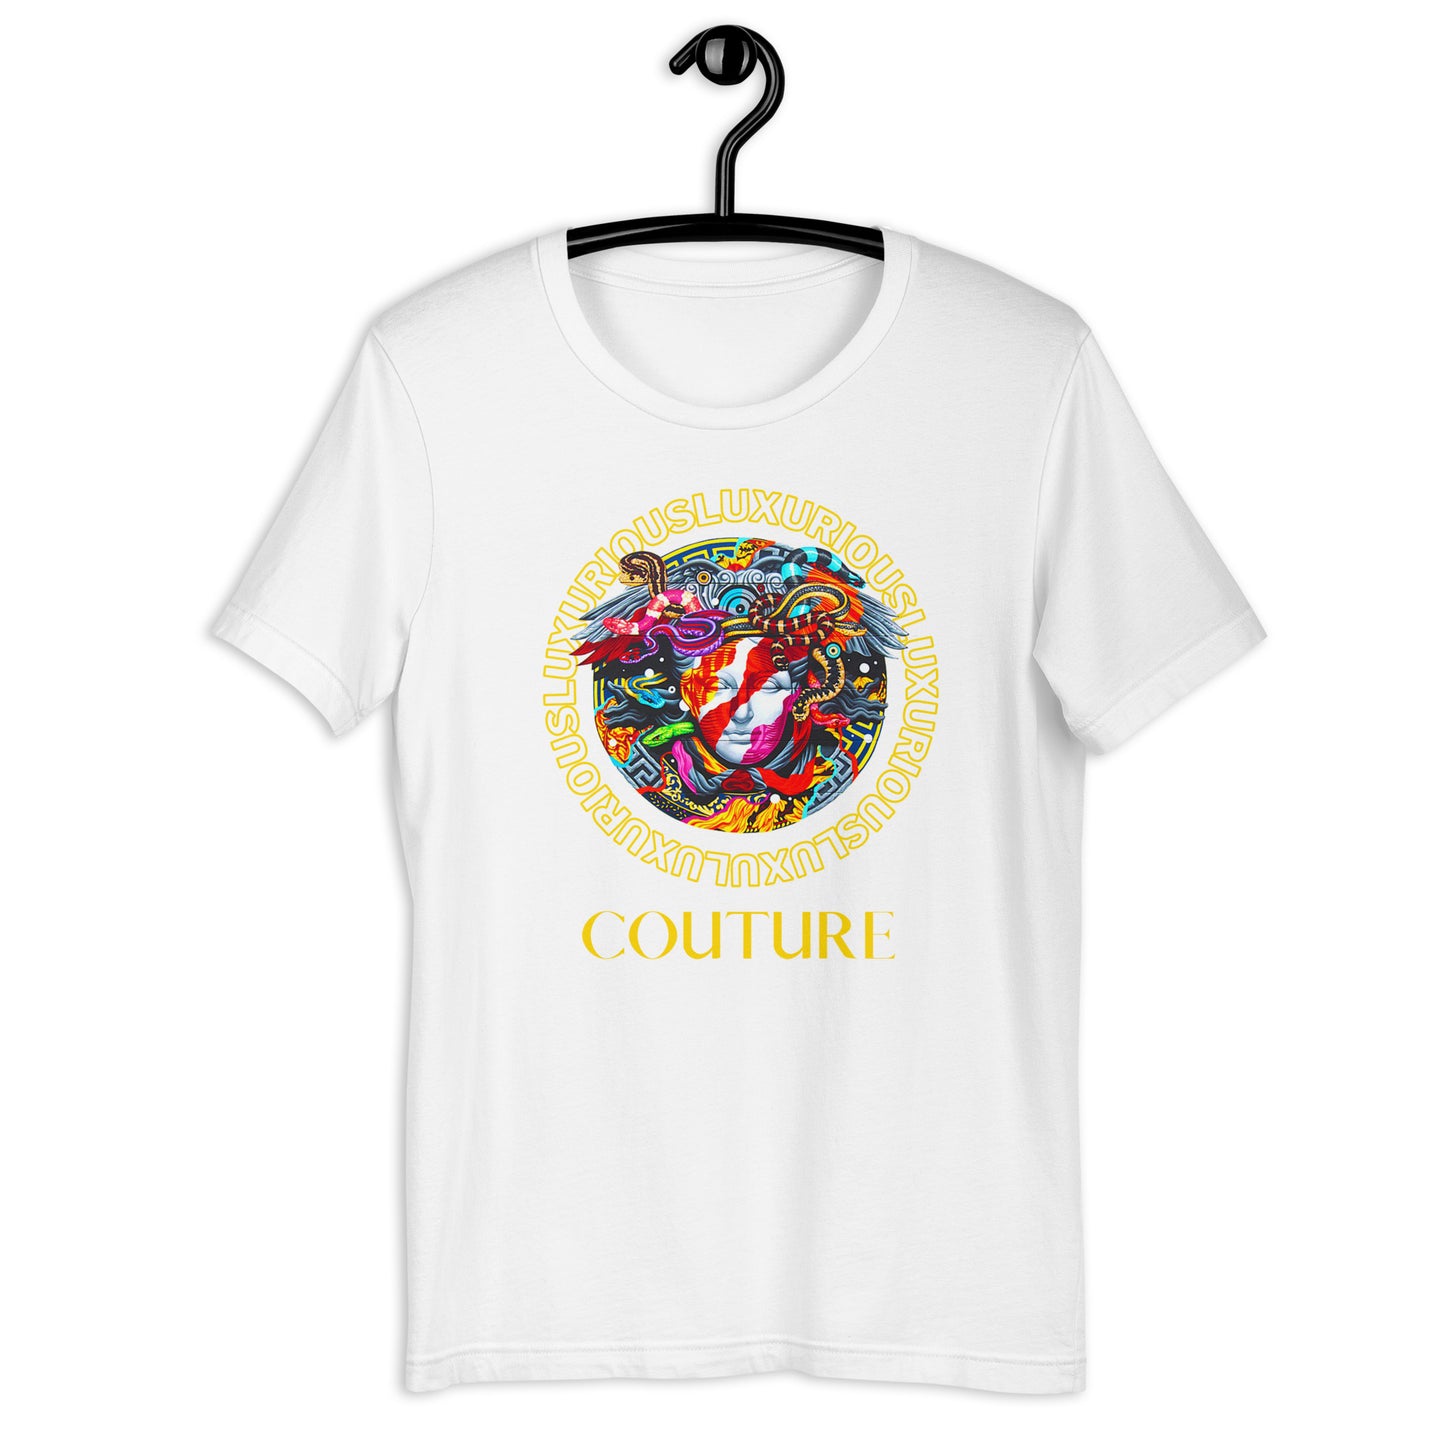 Luxurious Couture - Tee